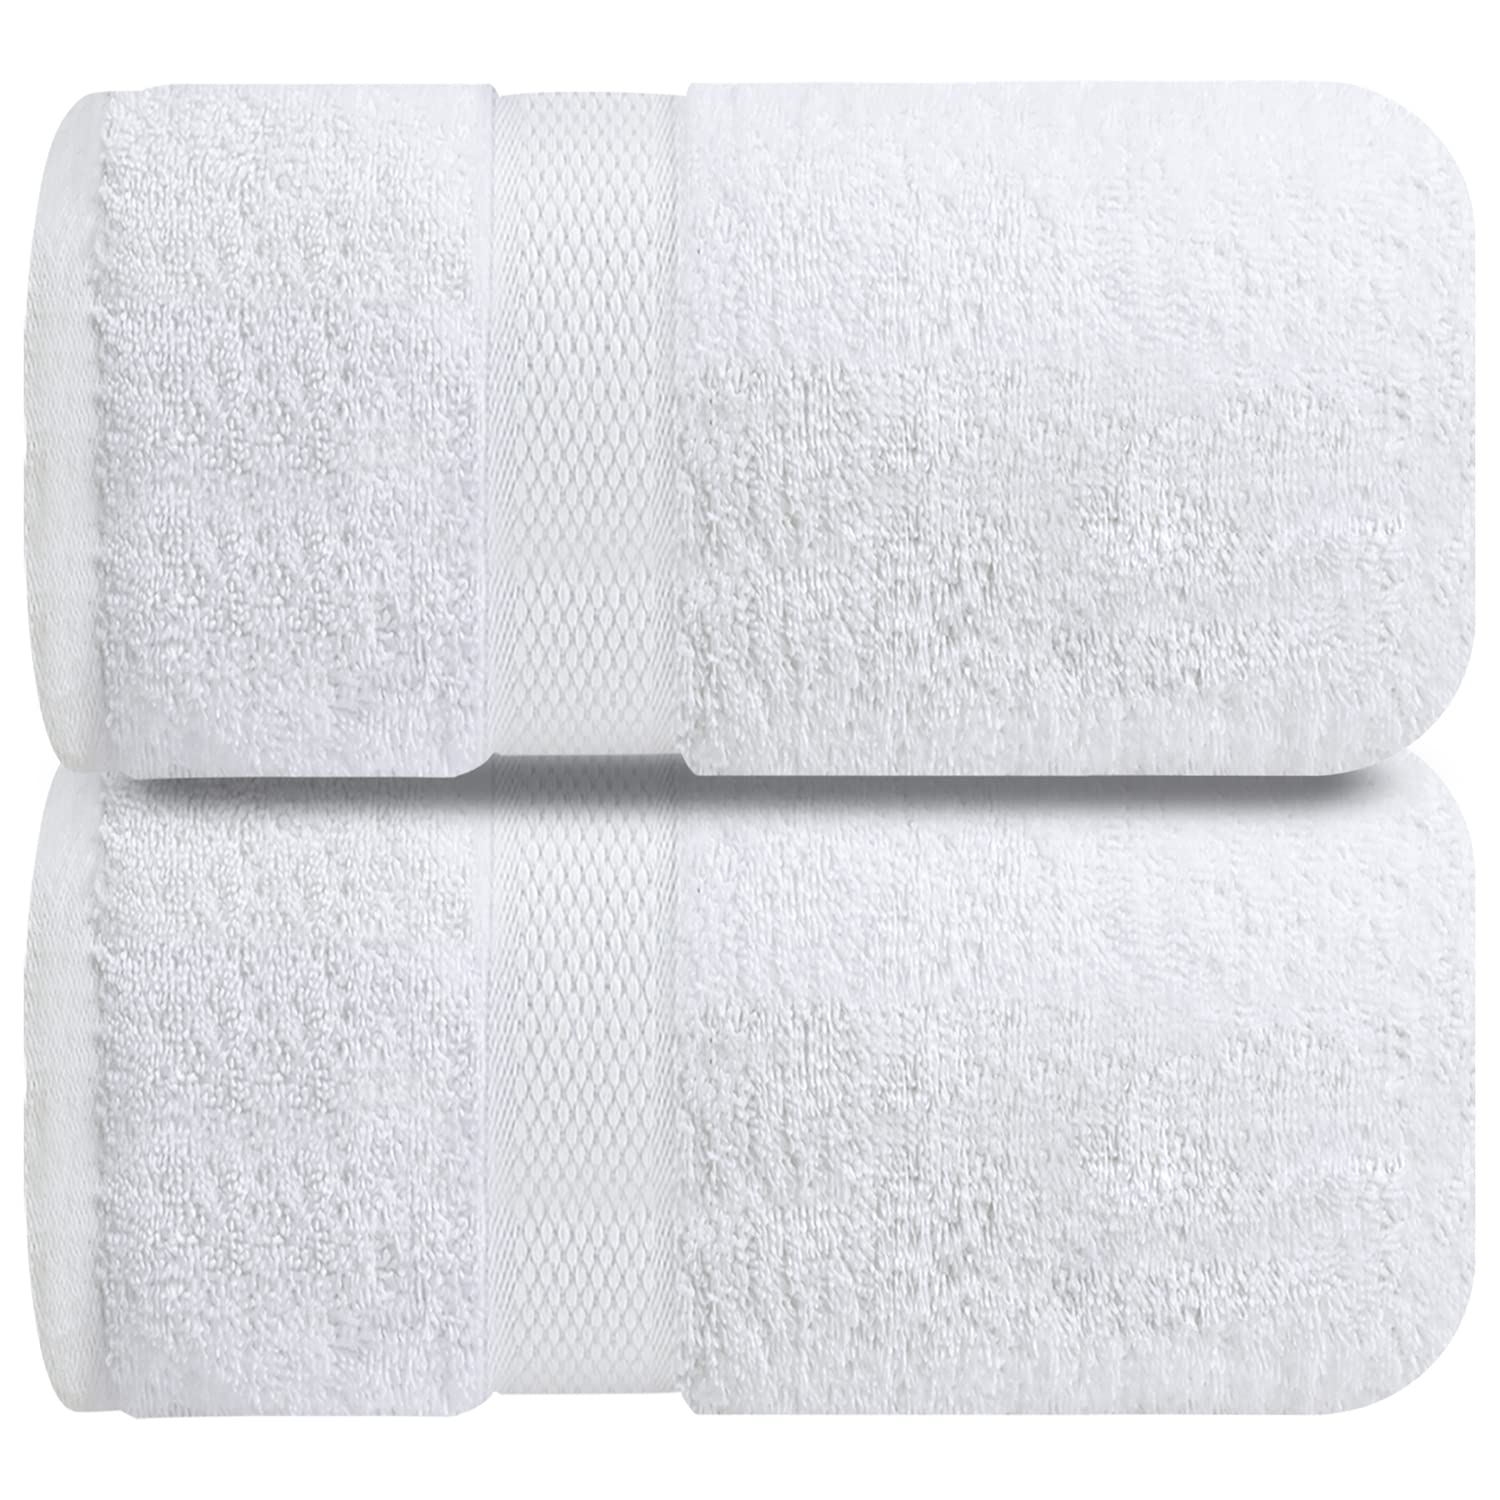 Smuge 4 Pack Bath Towels Extra Large 35x 70Highly Absorbent